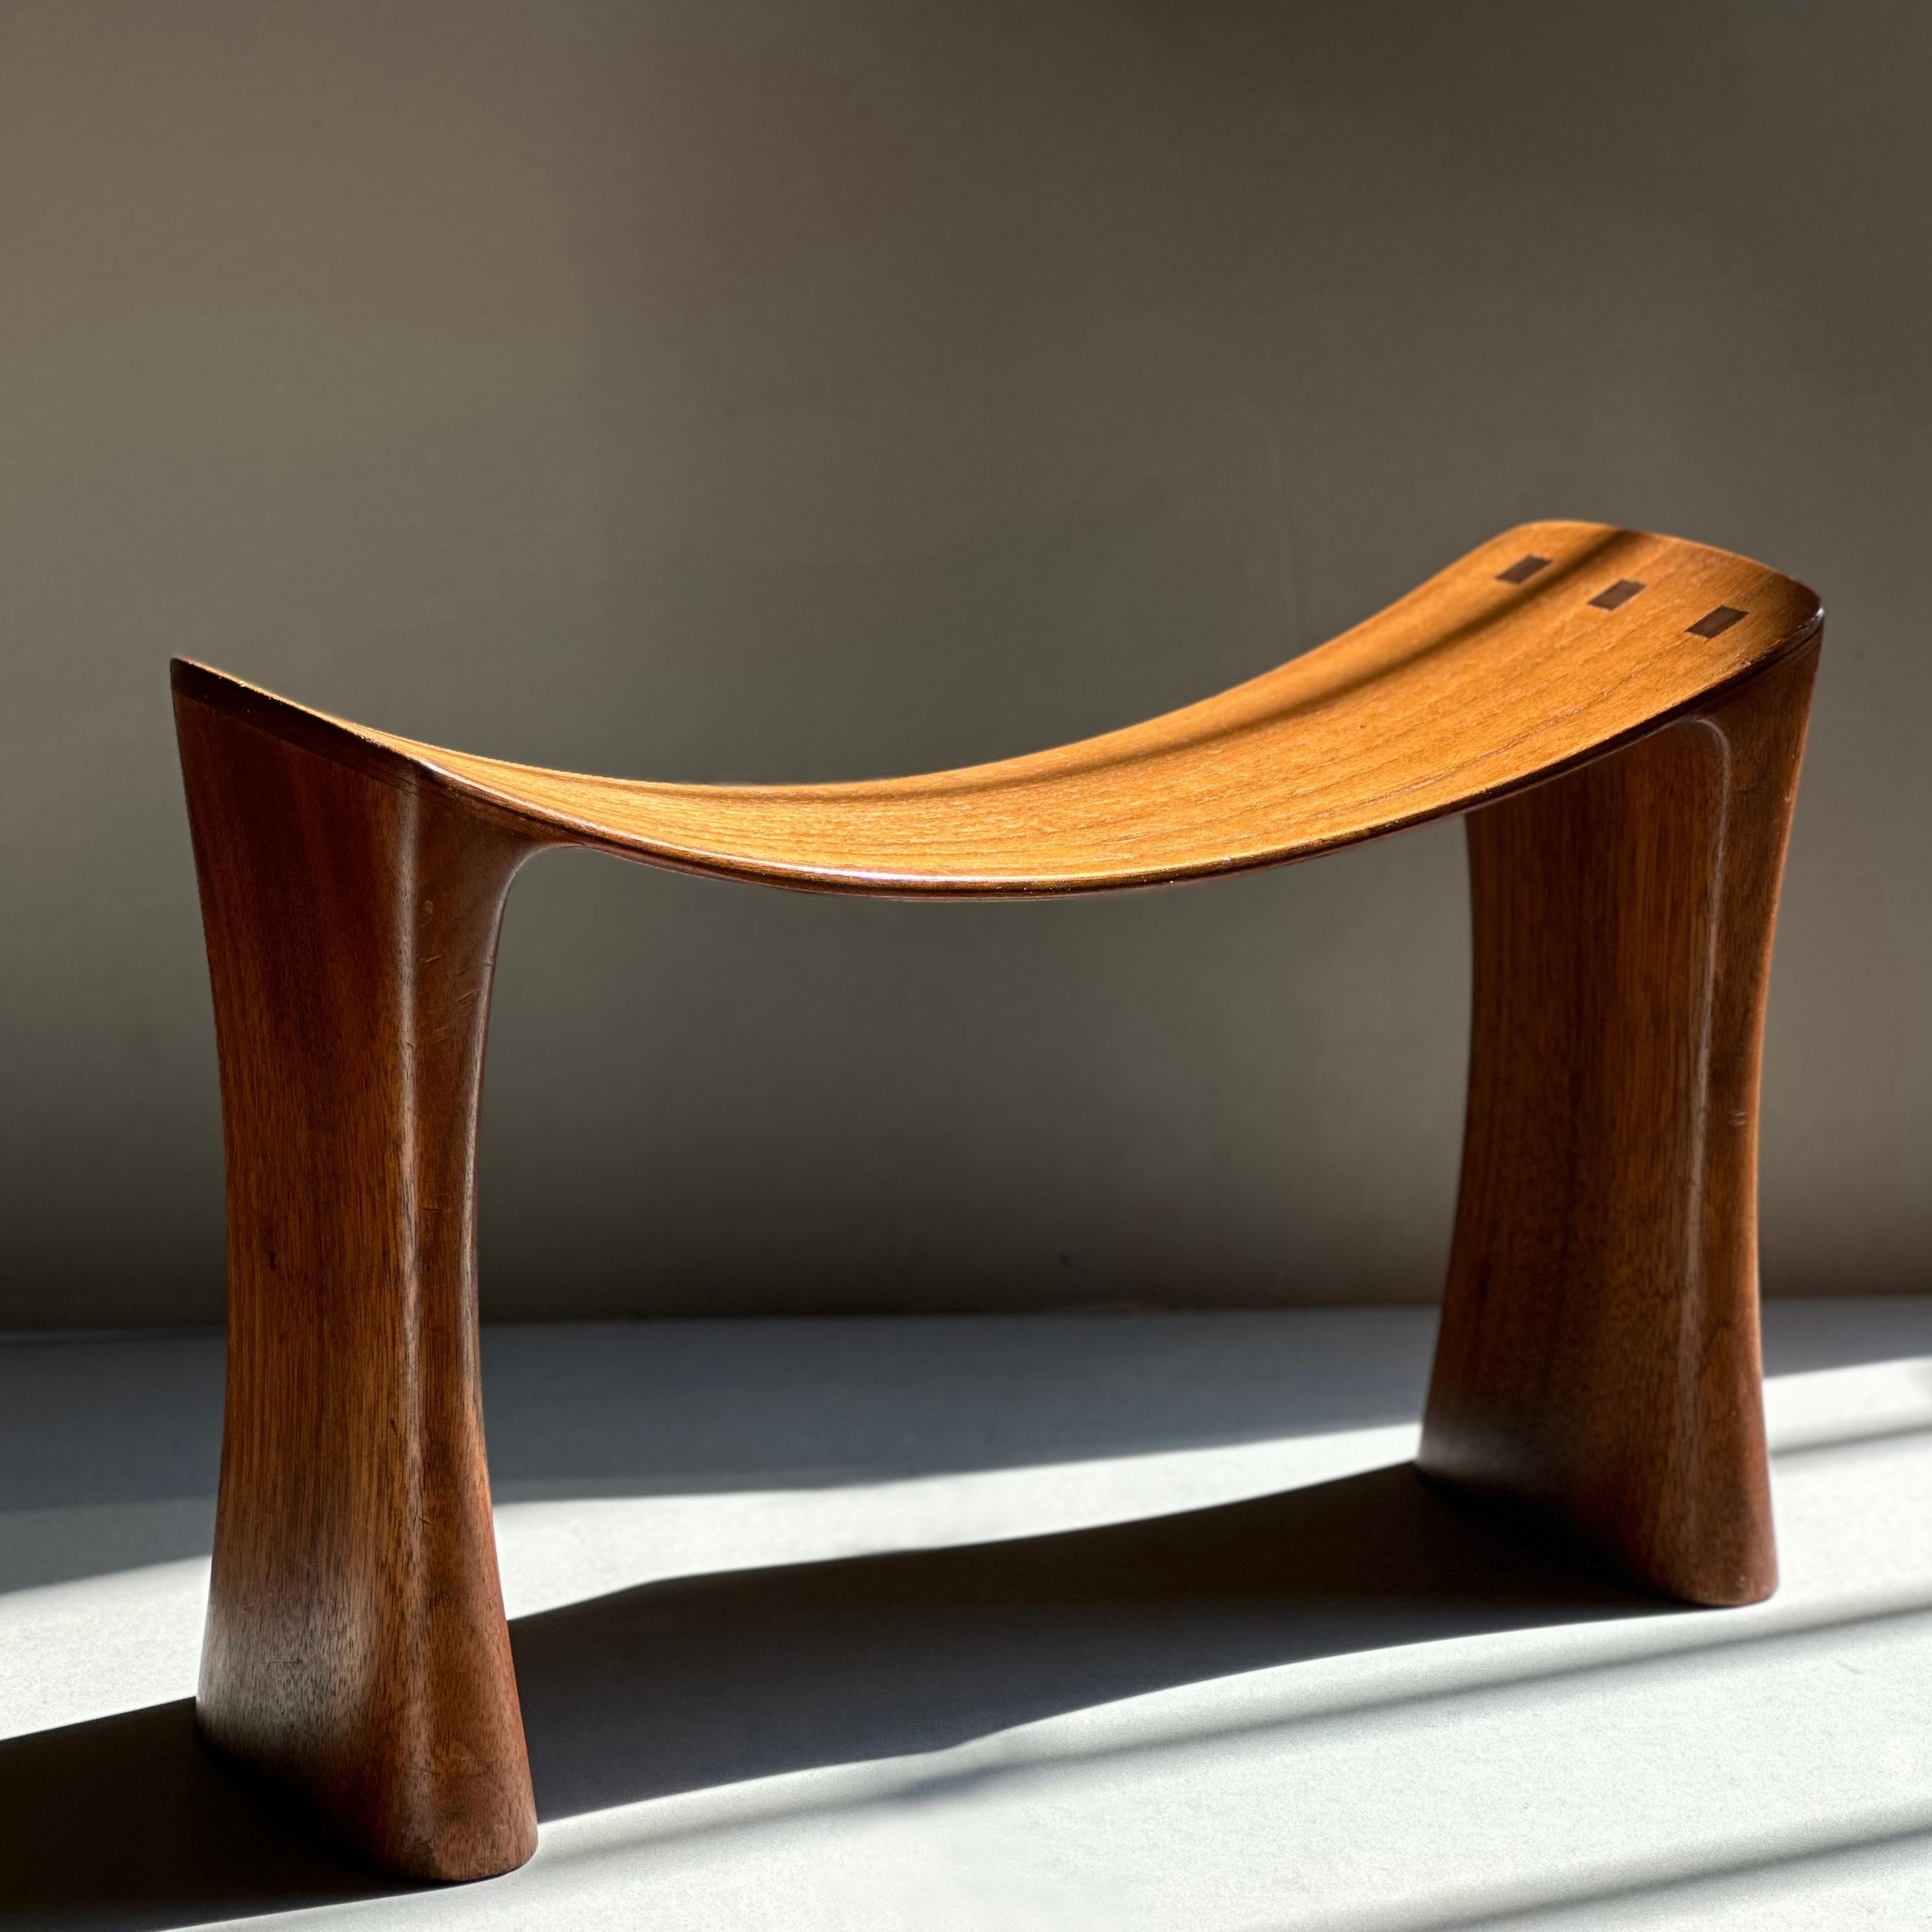 A sublime African tribal stool or headrest sculpture by Evert Sodergren, comprising gently carved legs supporting a bent lamination seat punctuated by visible joinery. This design was Sodergren’s response to a request from the artist Morris Graves